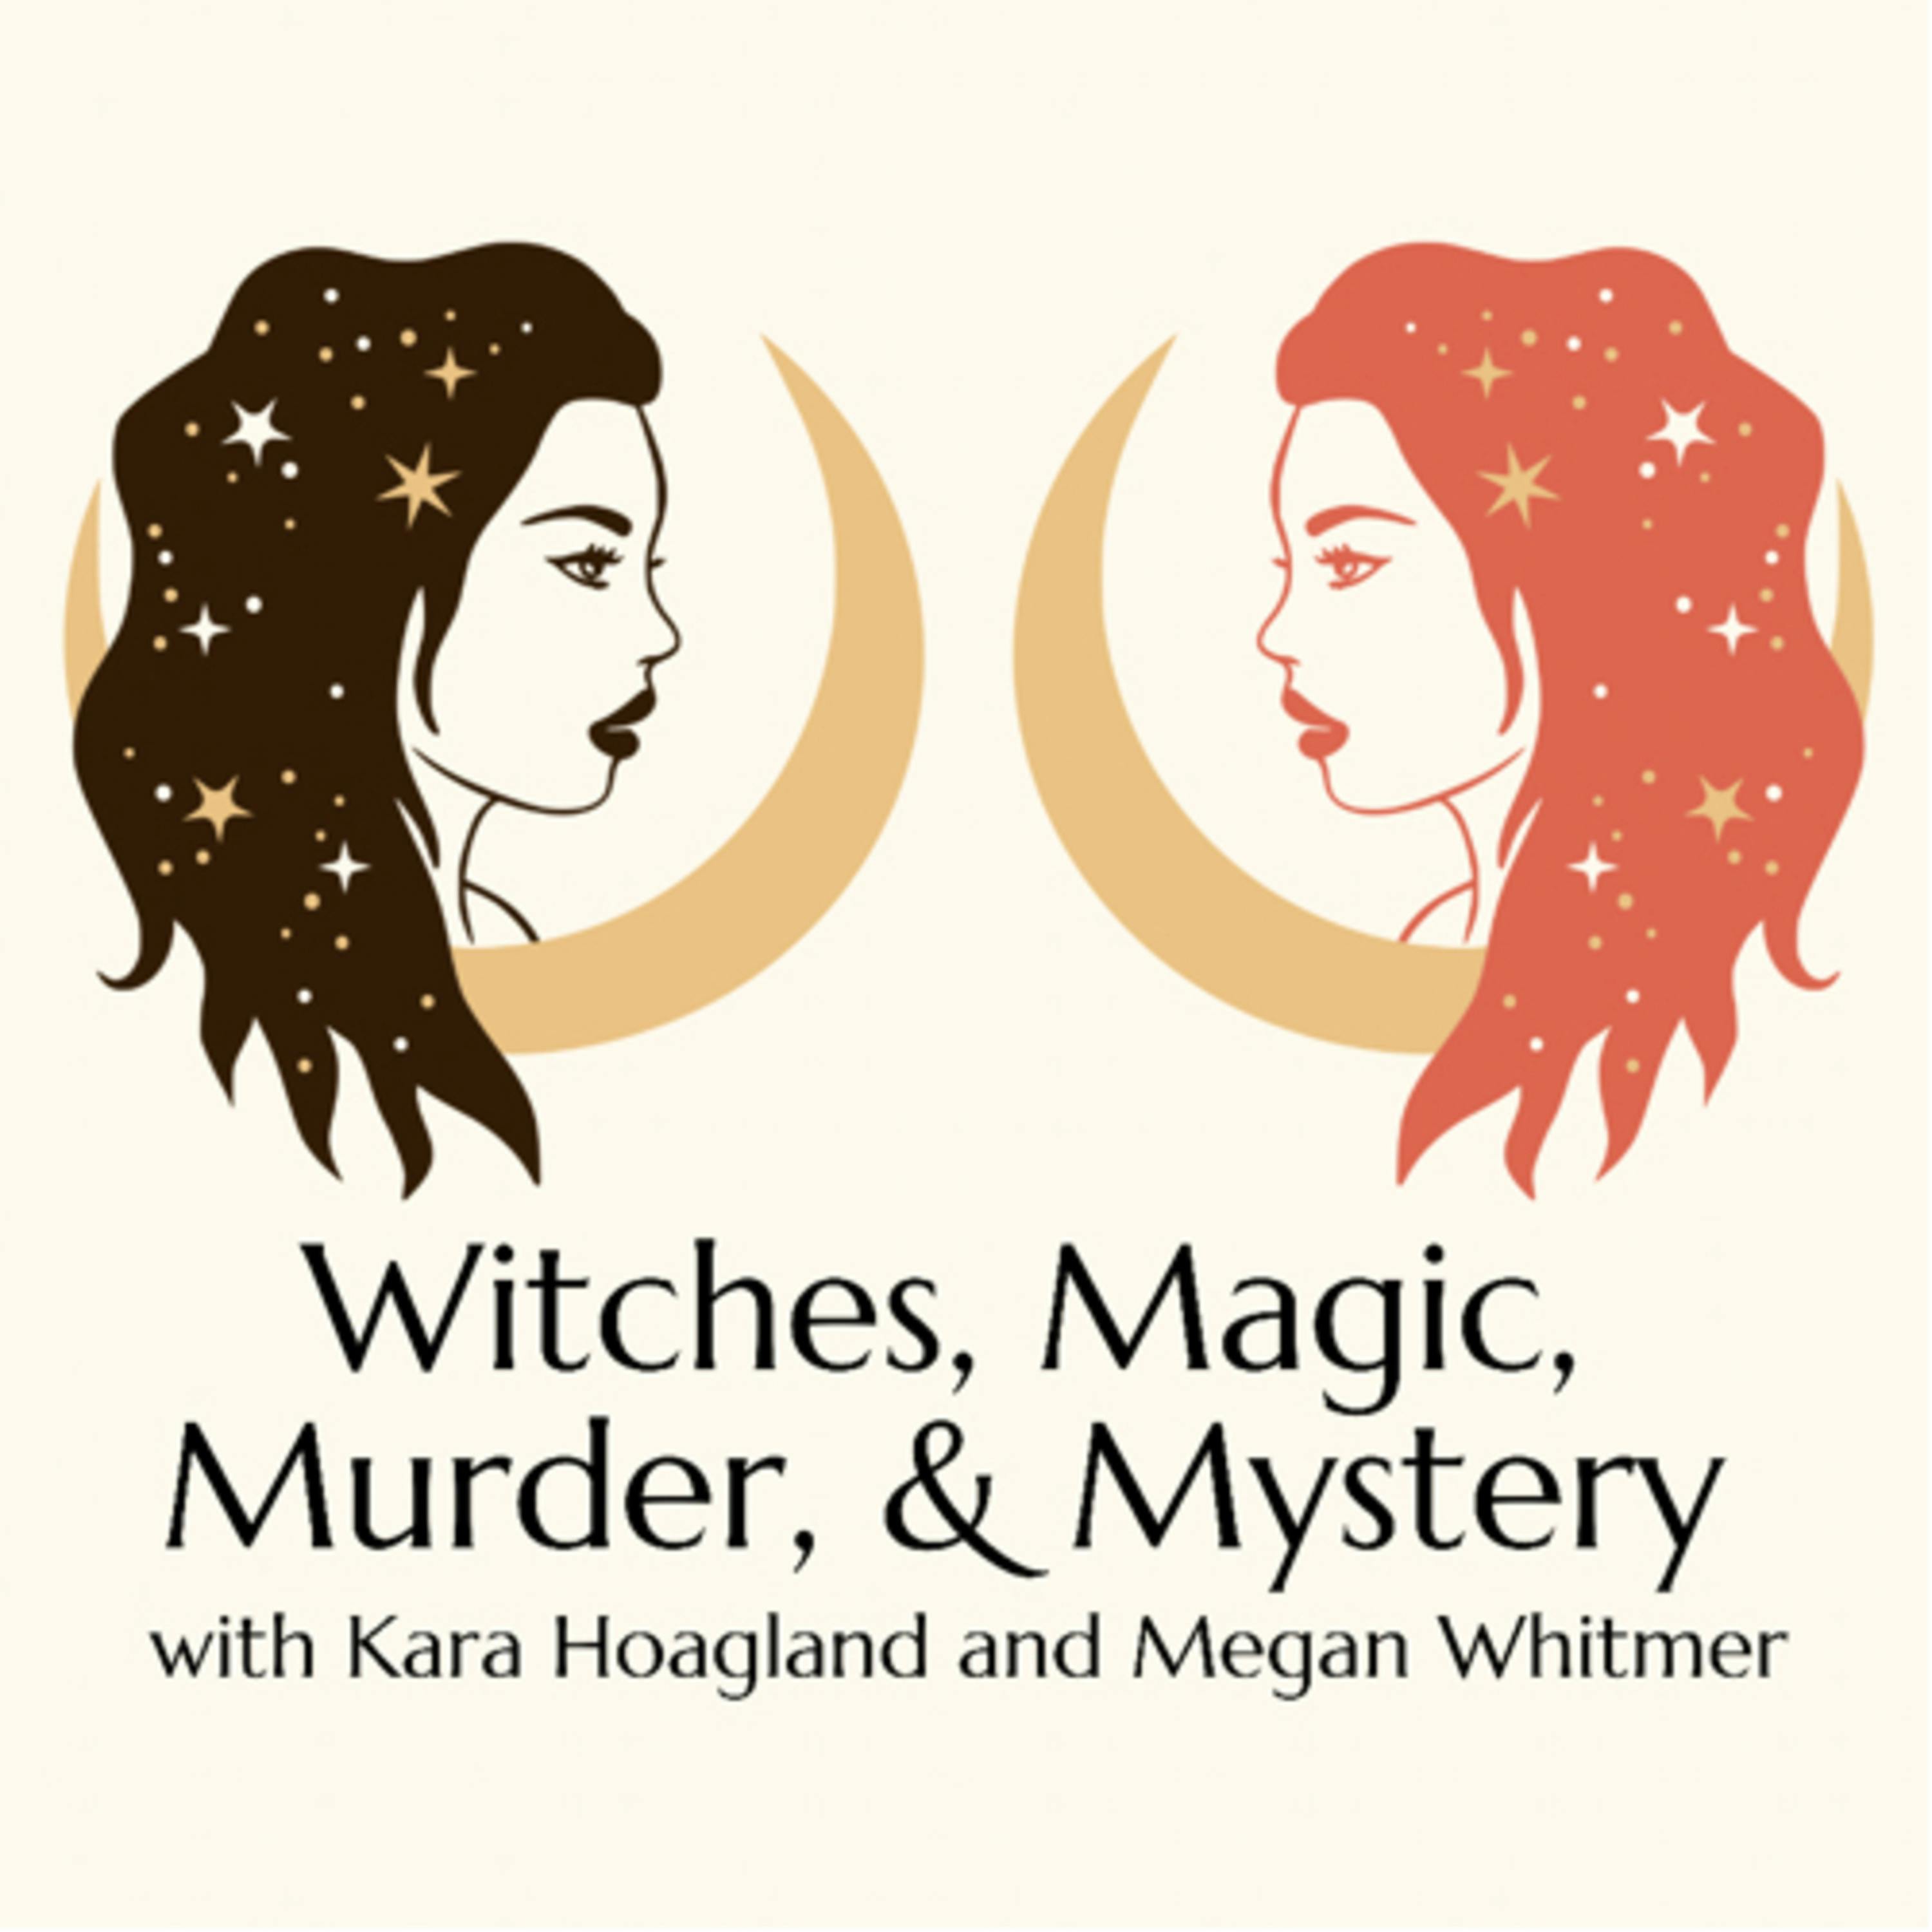 210. WITCH: The Towne Sisters